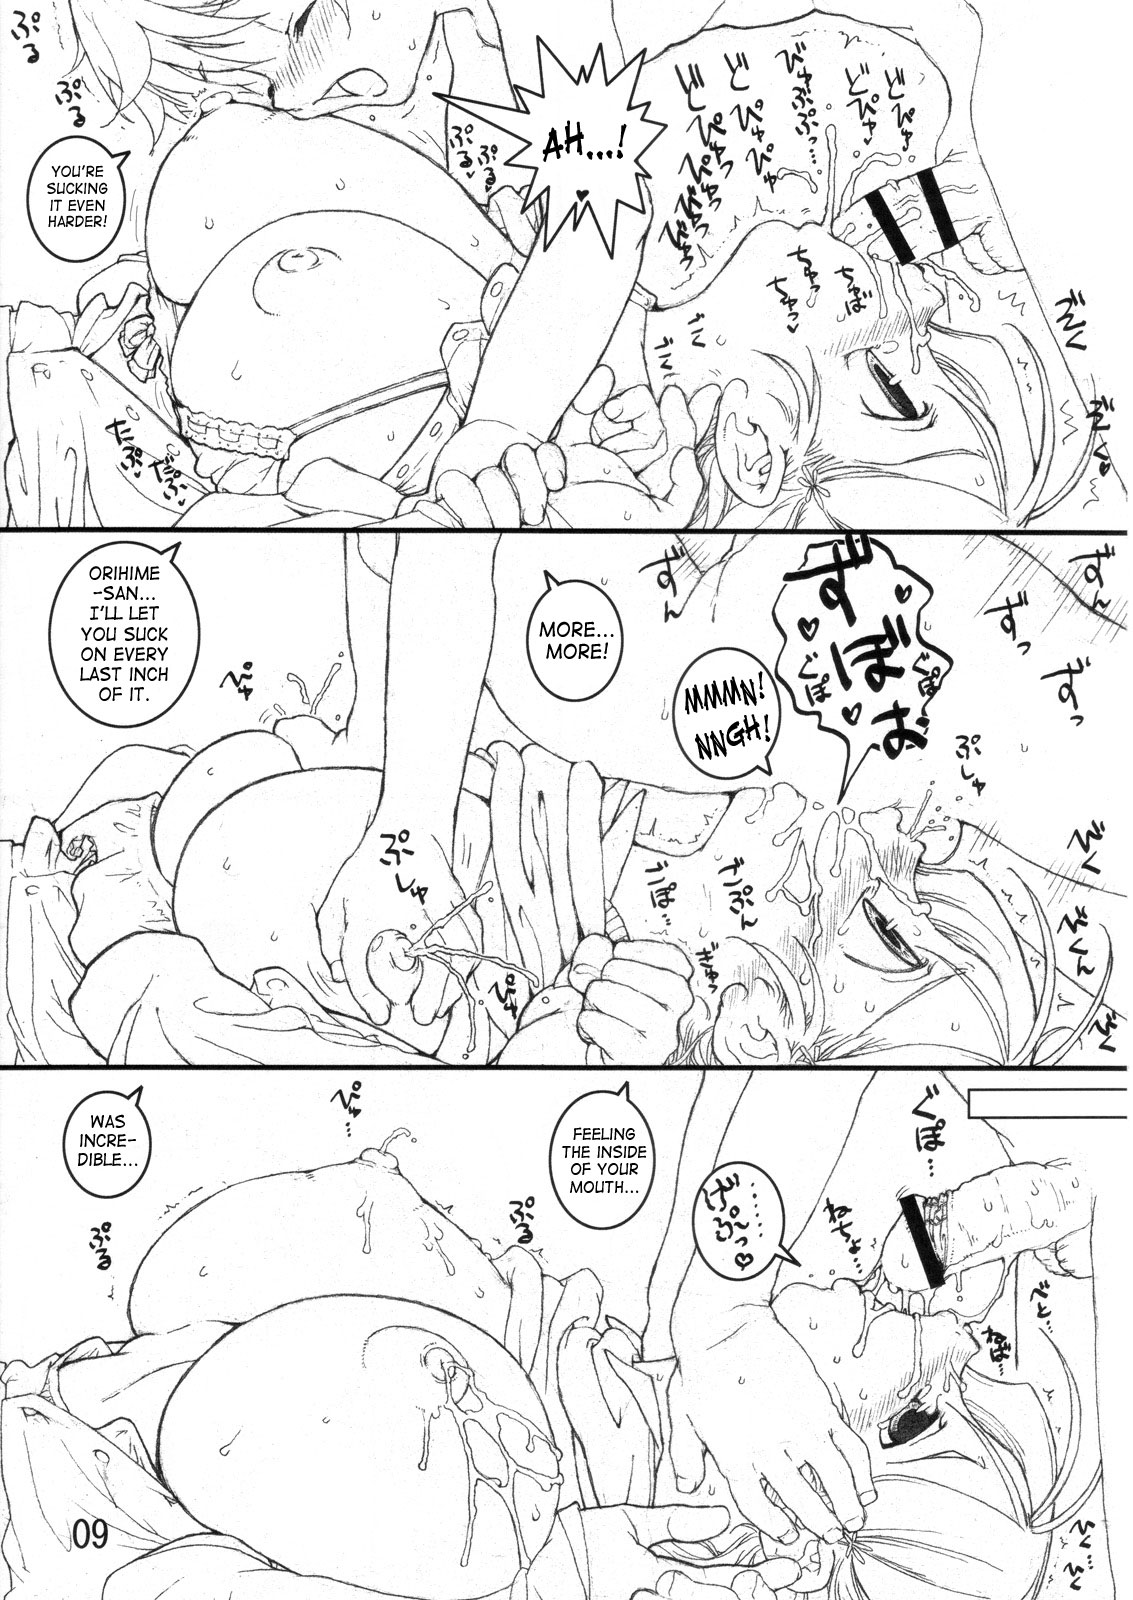 (COMIC1) [Tololinco (Tololi)] Orihime to Issho! -Stay With Orihime- (Bleach) [English] [SaHa] page 8 full